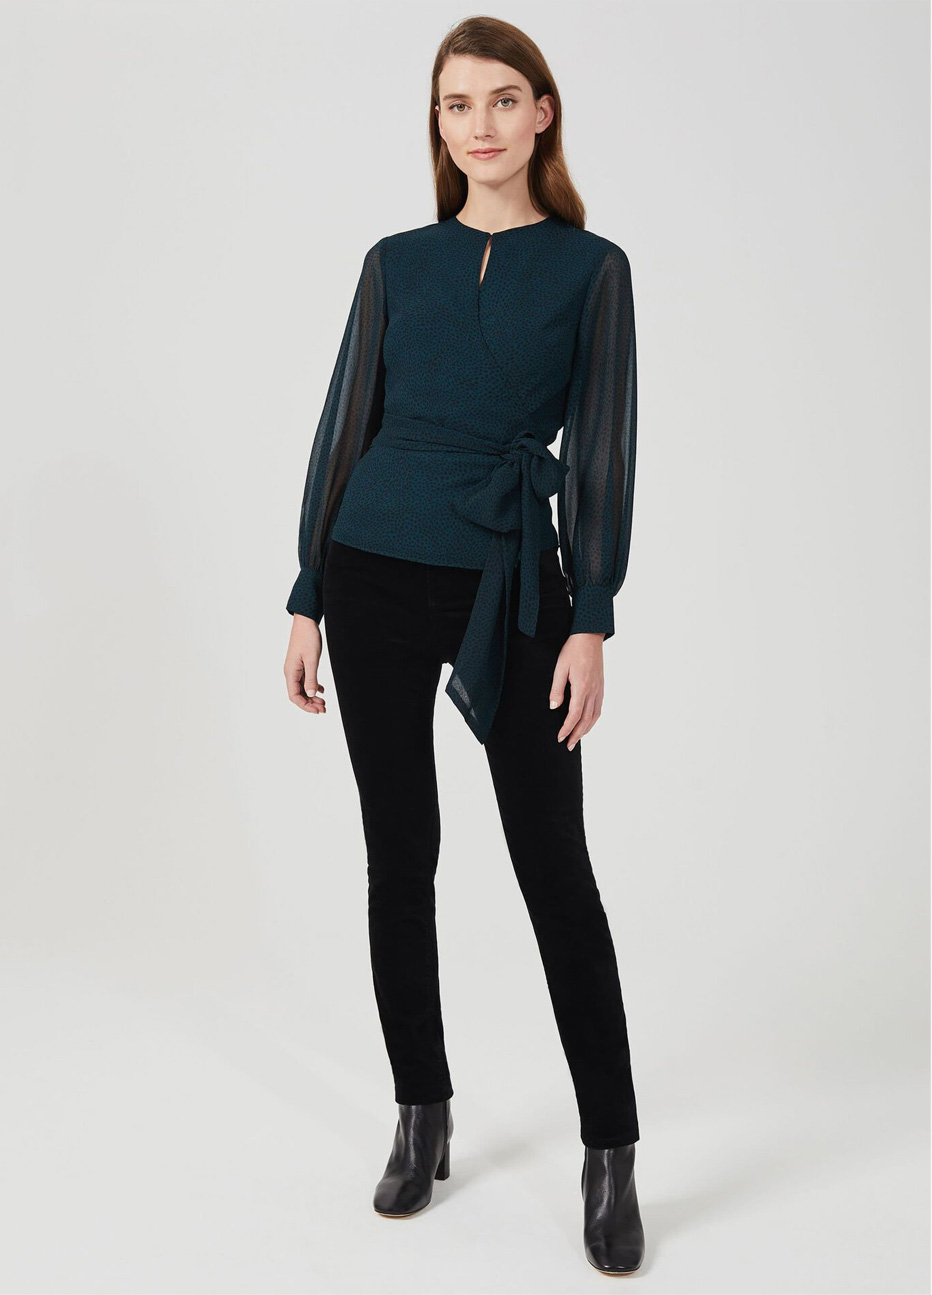 Hobbs model wearing a wrap blouse with sheer sleeves, styled with black fitted jeans and black leather boots.